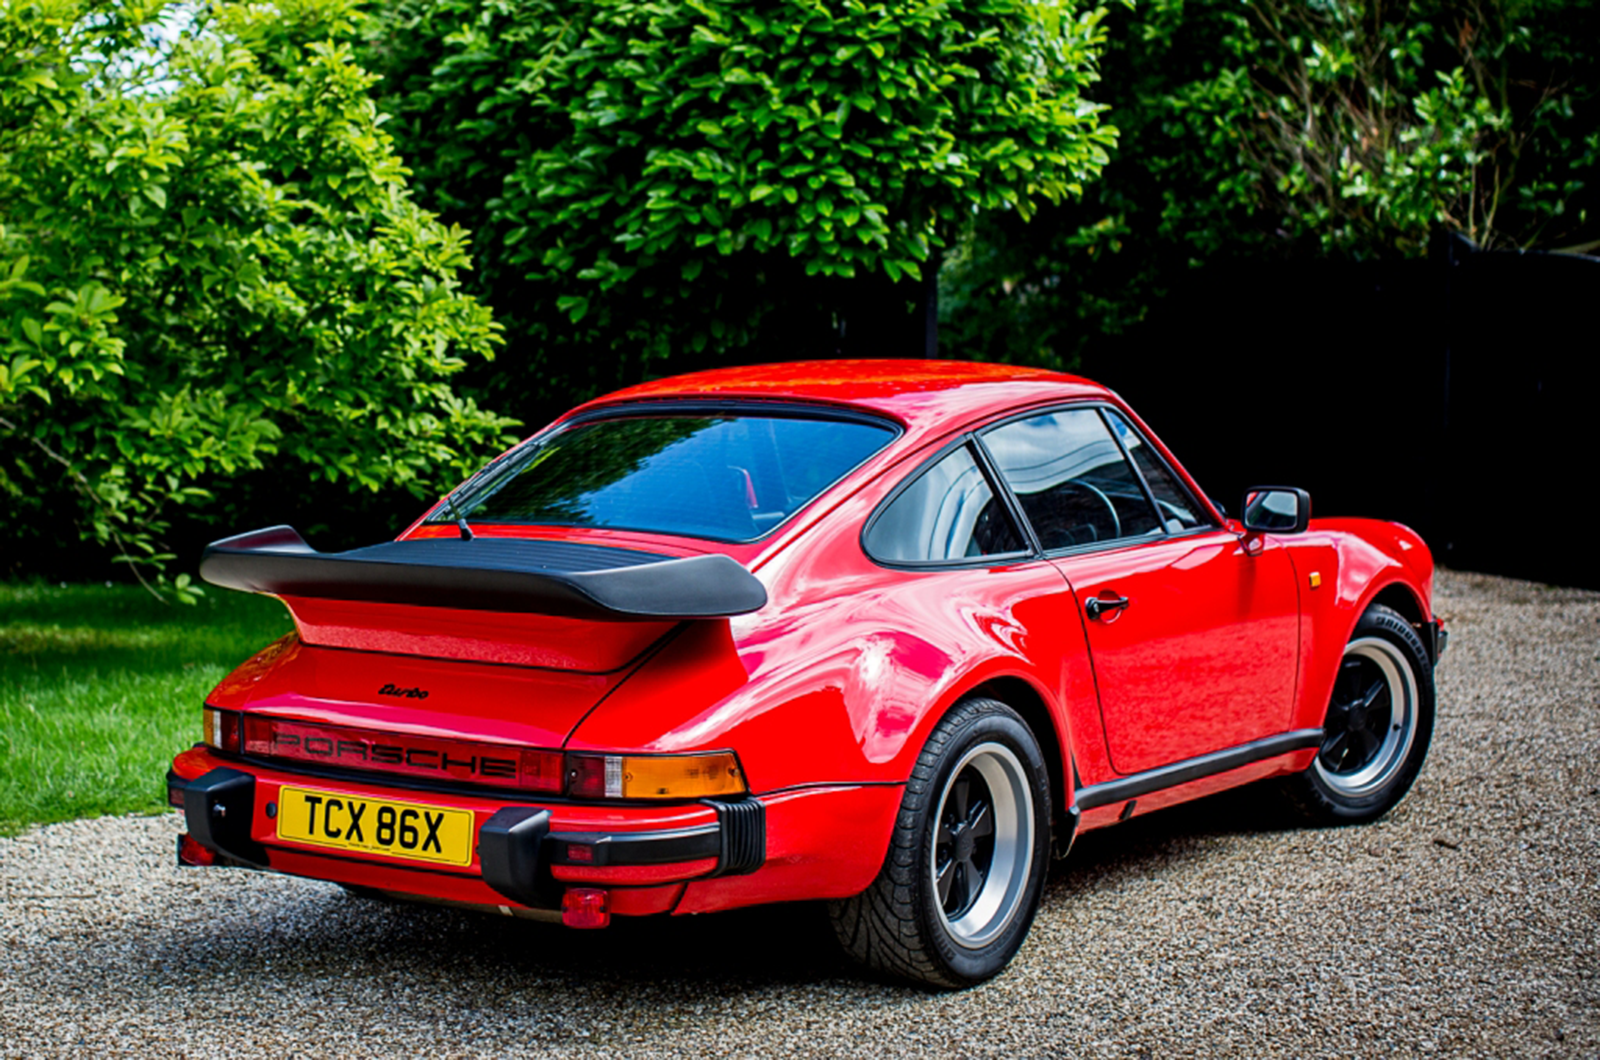 Classic & Sports Car – This incredible 911 topped Historics’ latest sale